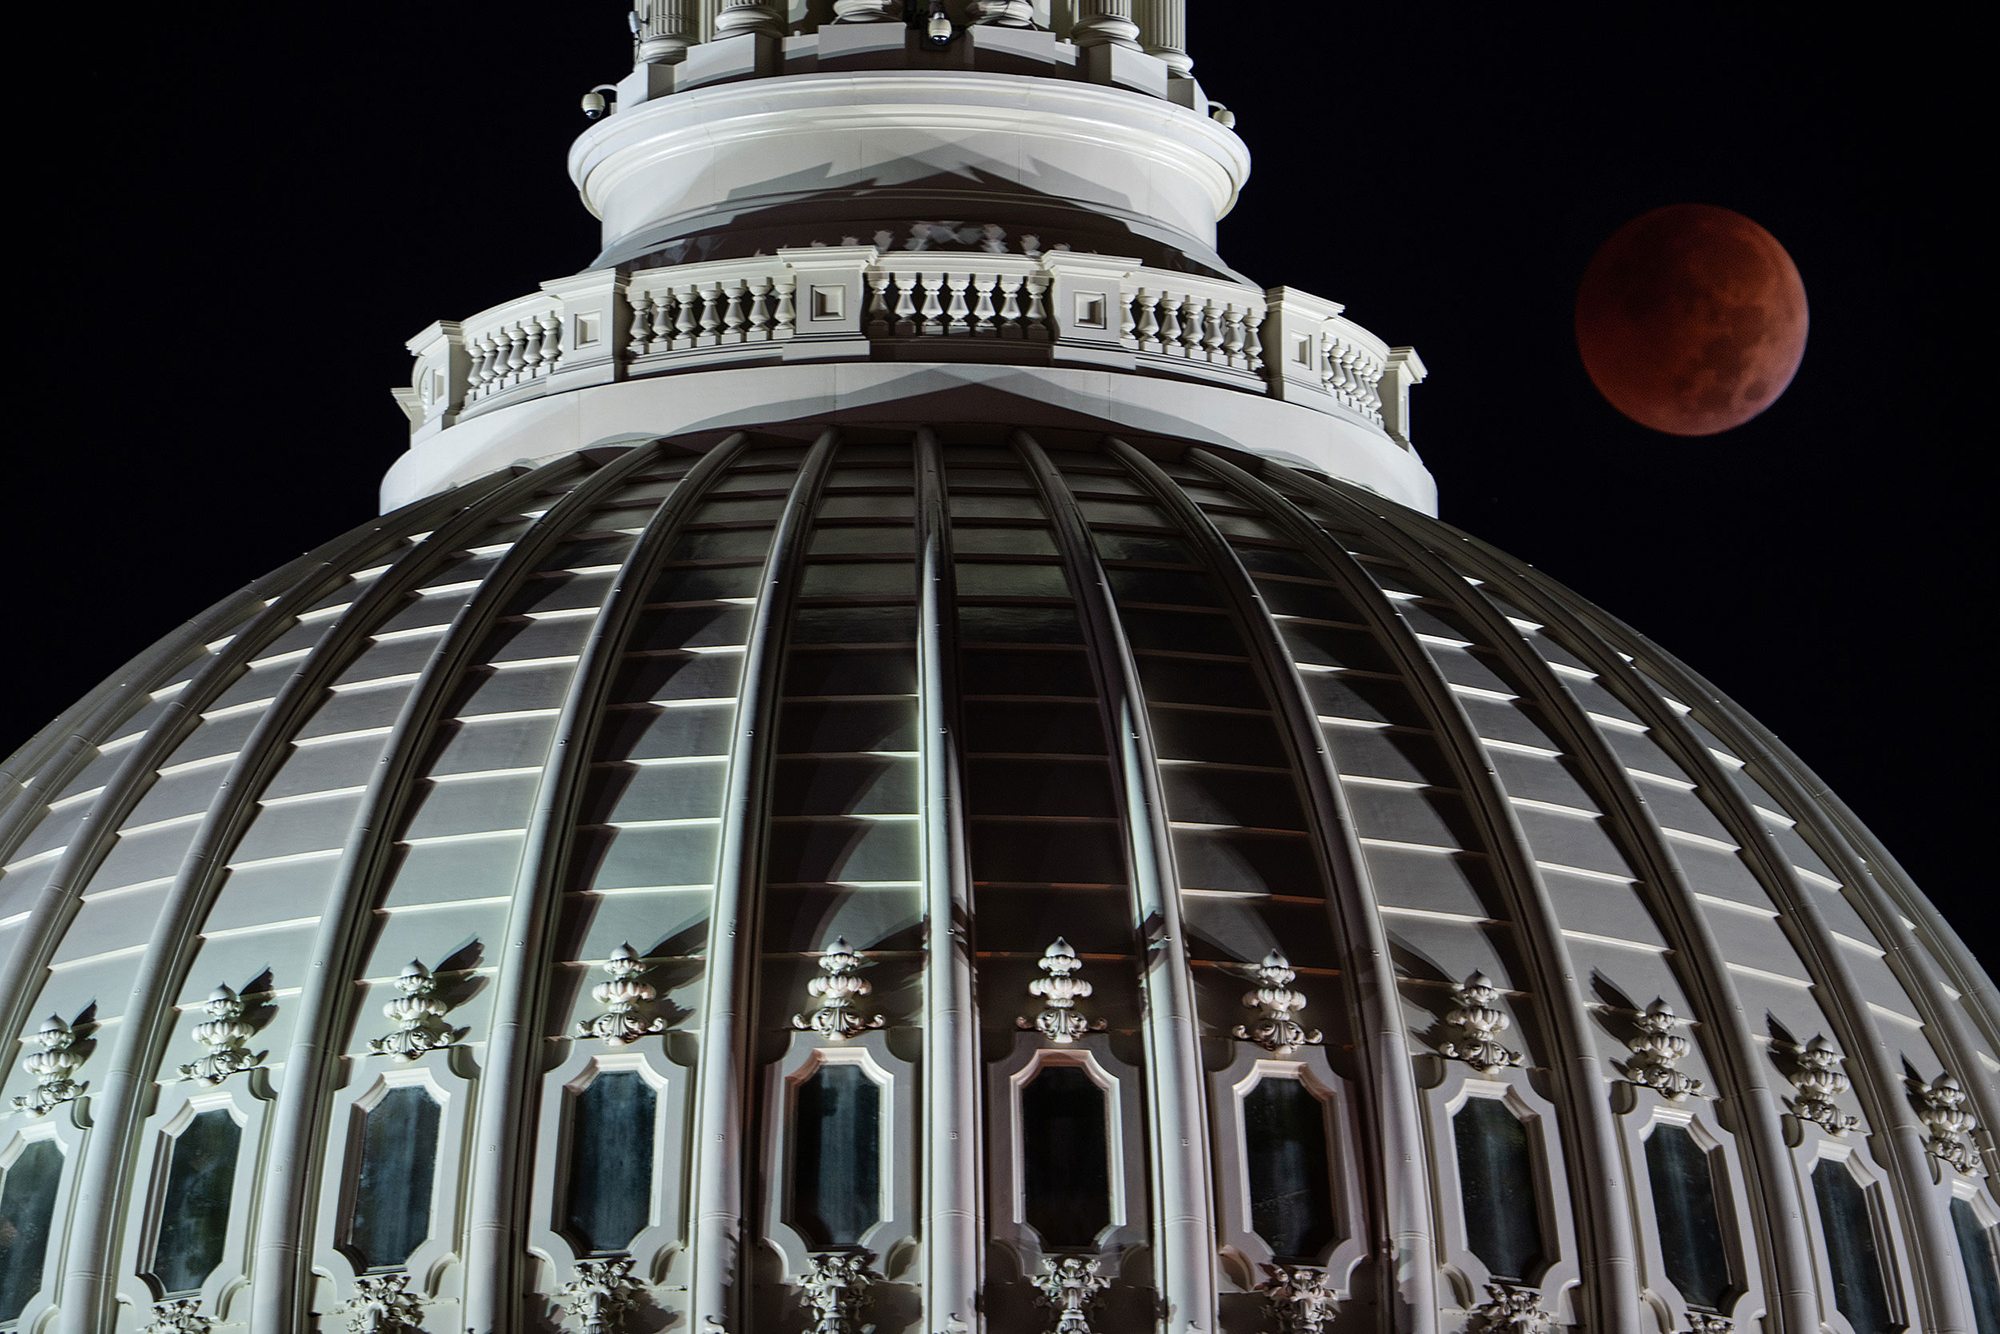 A blood moon lunar eclipse is seen behind the U.S. Capitol dome in Washington, D.C. on Election Day, Tuesday.